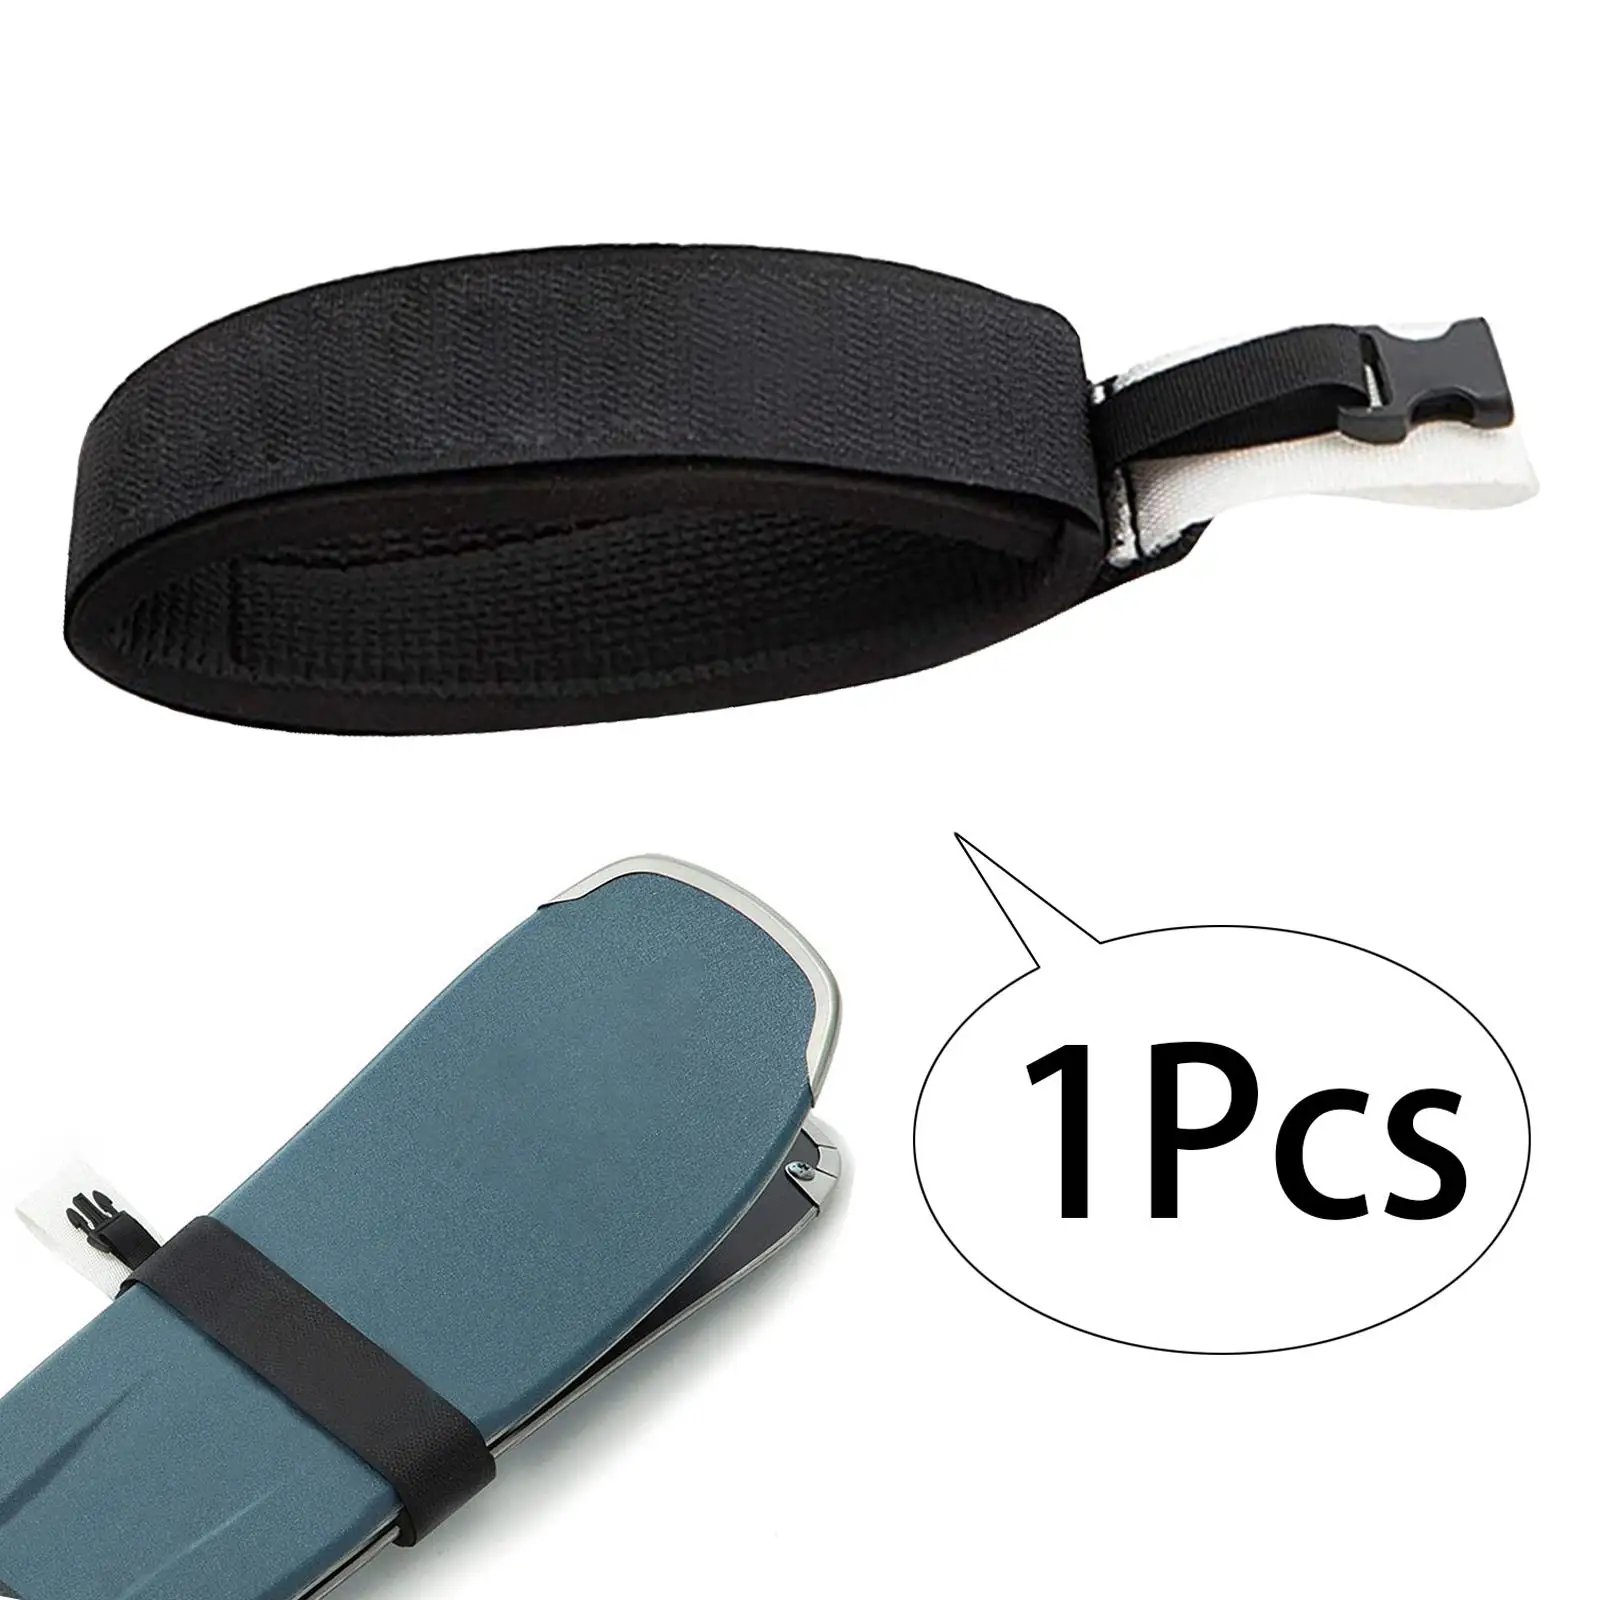 Ski Strap Lightweight for Carrying Durable with EVA Protector Pad Ski Wrap